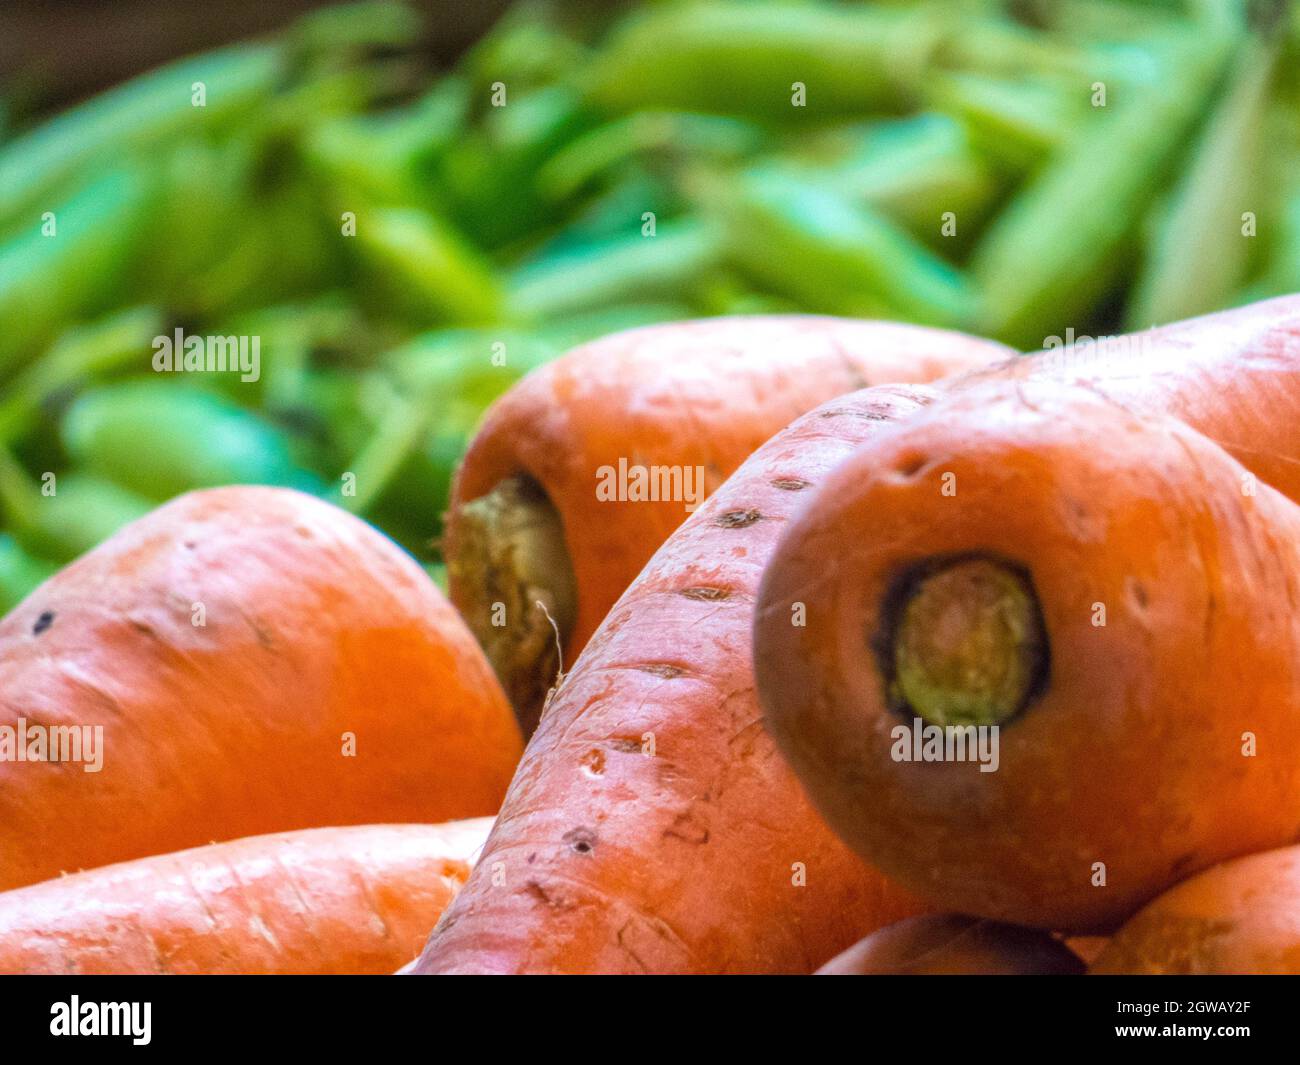 Carrots In Stock With Peas In Background Stock Photo